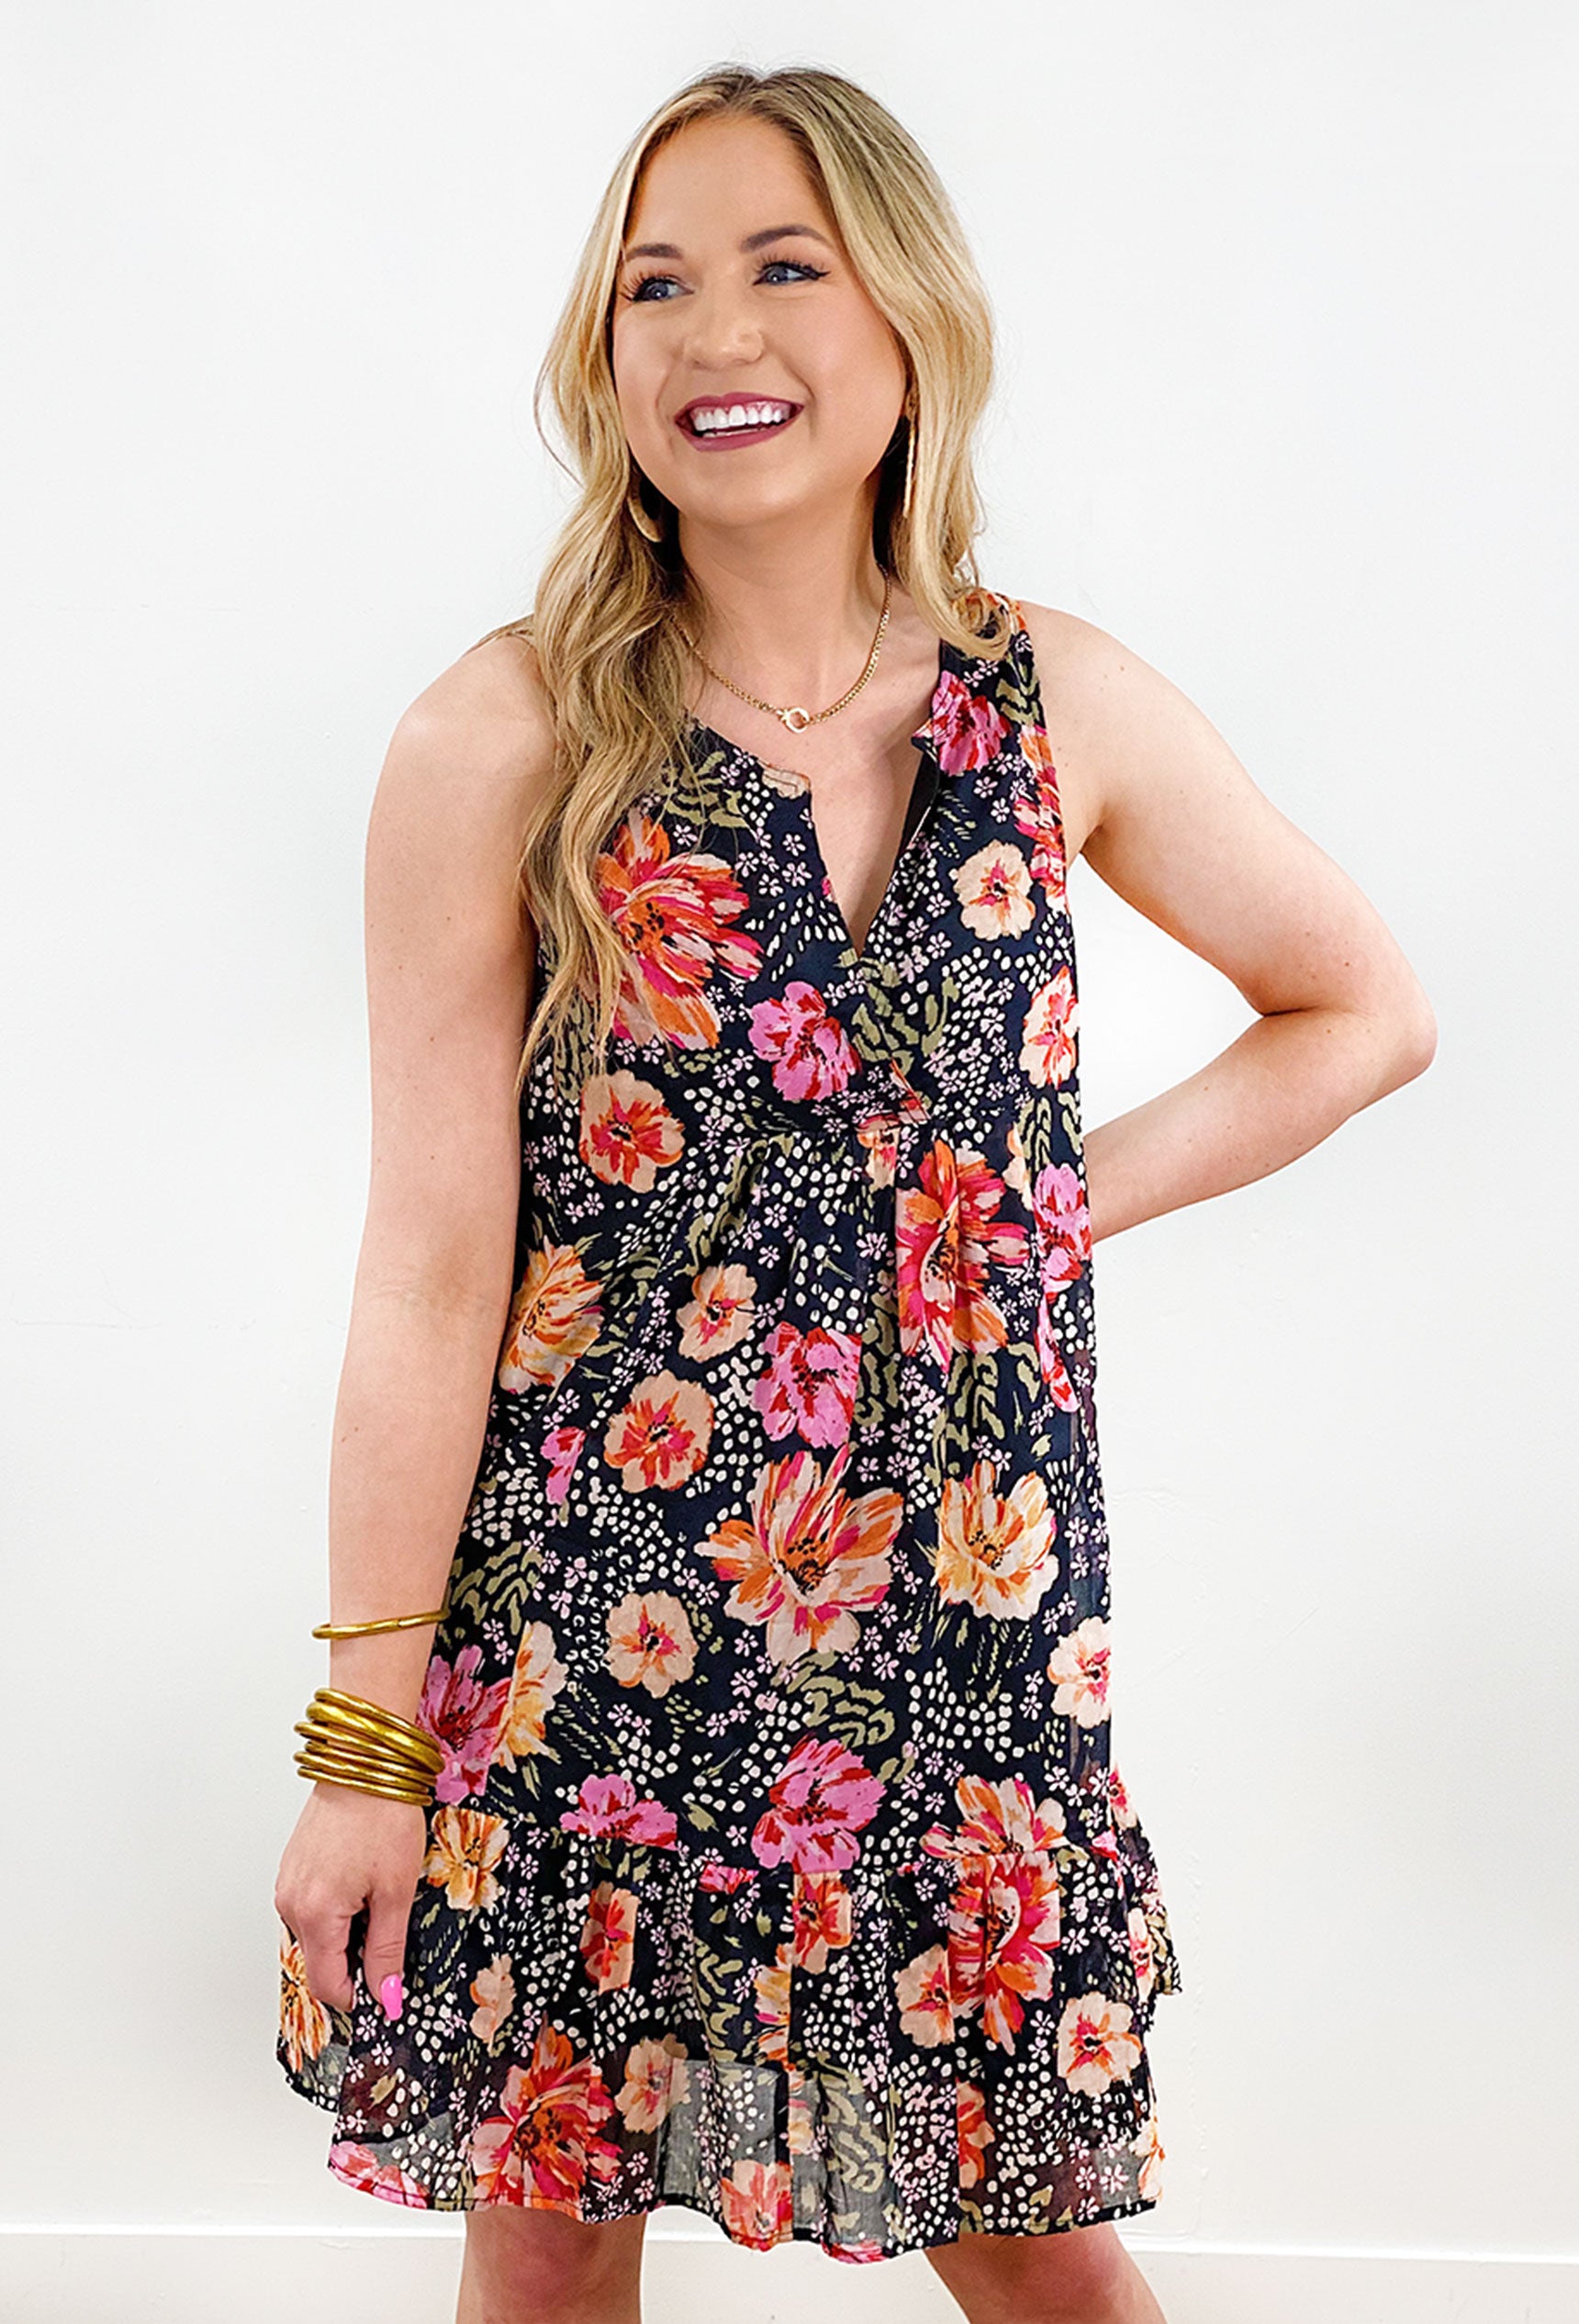 Plaza Brunch Floral Dress, Black mini dress enhanced by a vibrant floral print, delicately accented with subtle animal spots and a flattering v-neckline and breathable sleeveless cut